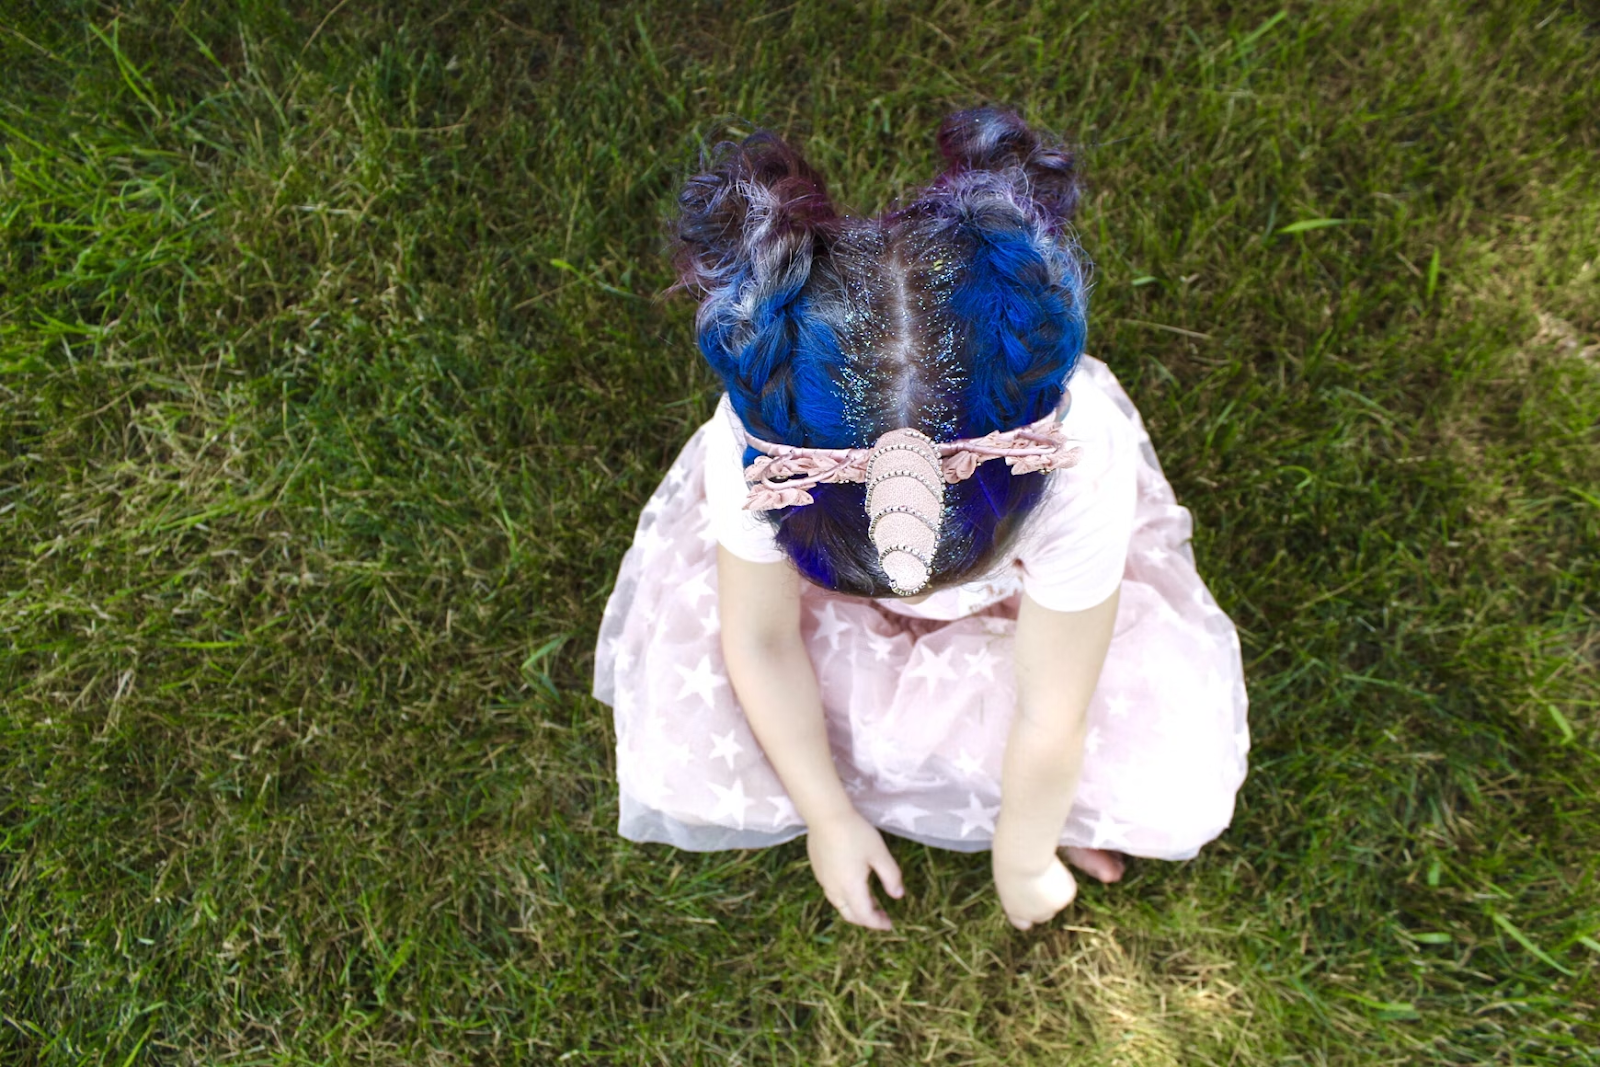 a little girl in a unicorn costume sits on grass